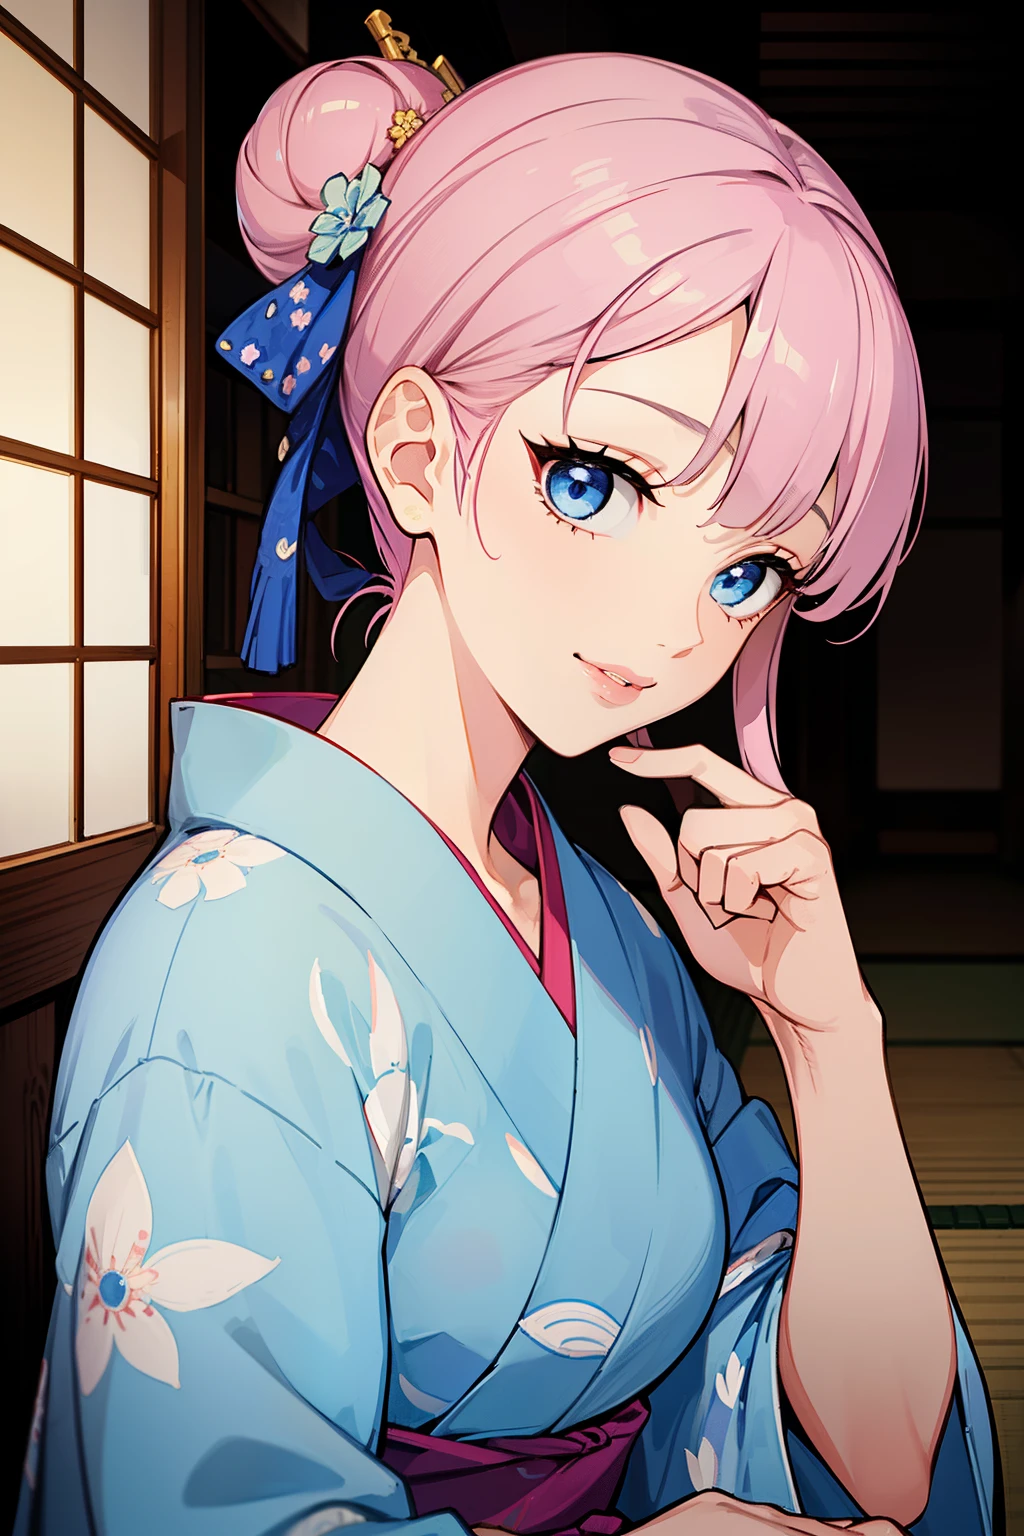 (high-quality, breathtaking),(expressive eyes, perfect face) (((yukata, sexy lips)), 1girl, female, solo, young adult, soft light pink hair, blue coloured eyes, stylised hair, gentle smile, short length hair, loose hair, side bangs, tied up, japanese clothing, elegant, soft make up, hair pin accessory in hair, oiran, demon slayer art style